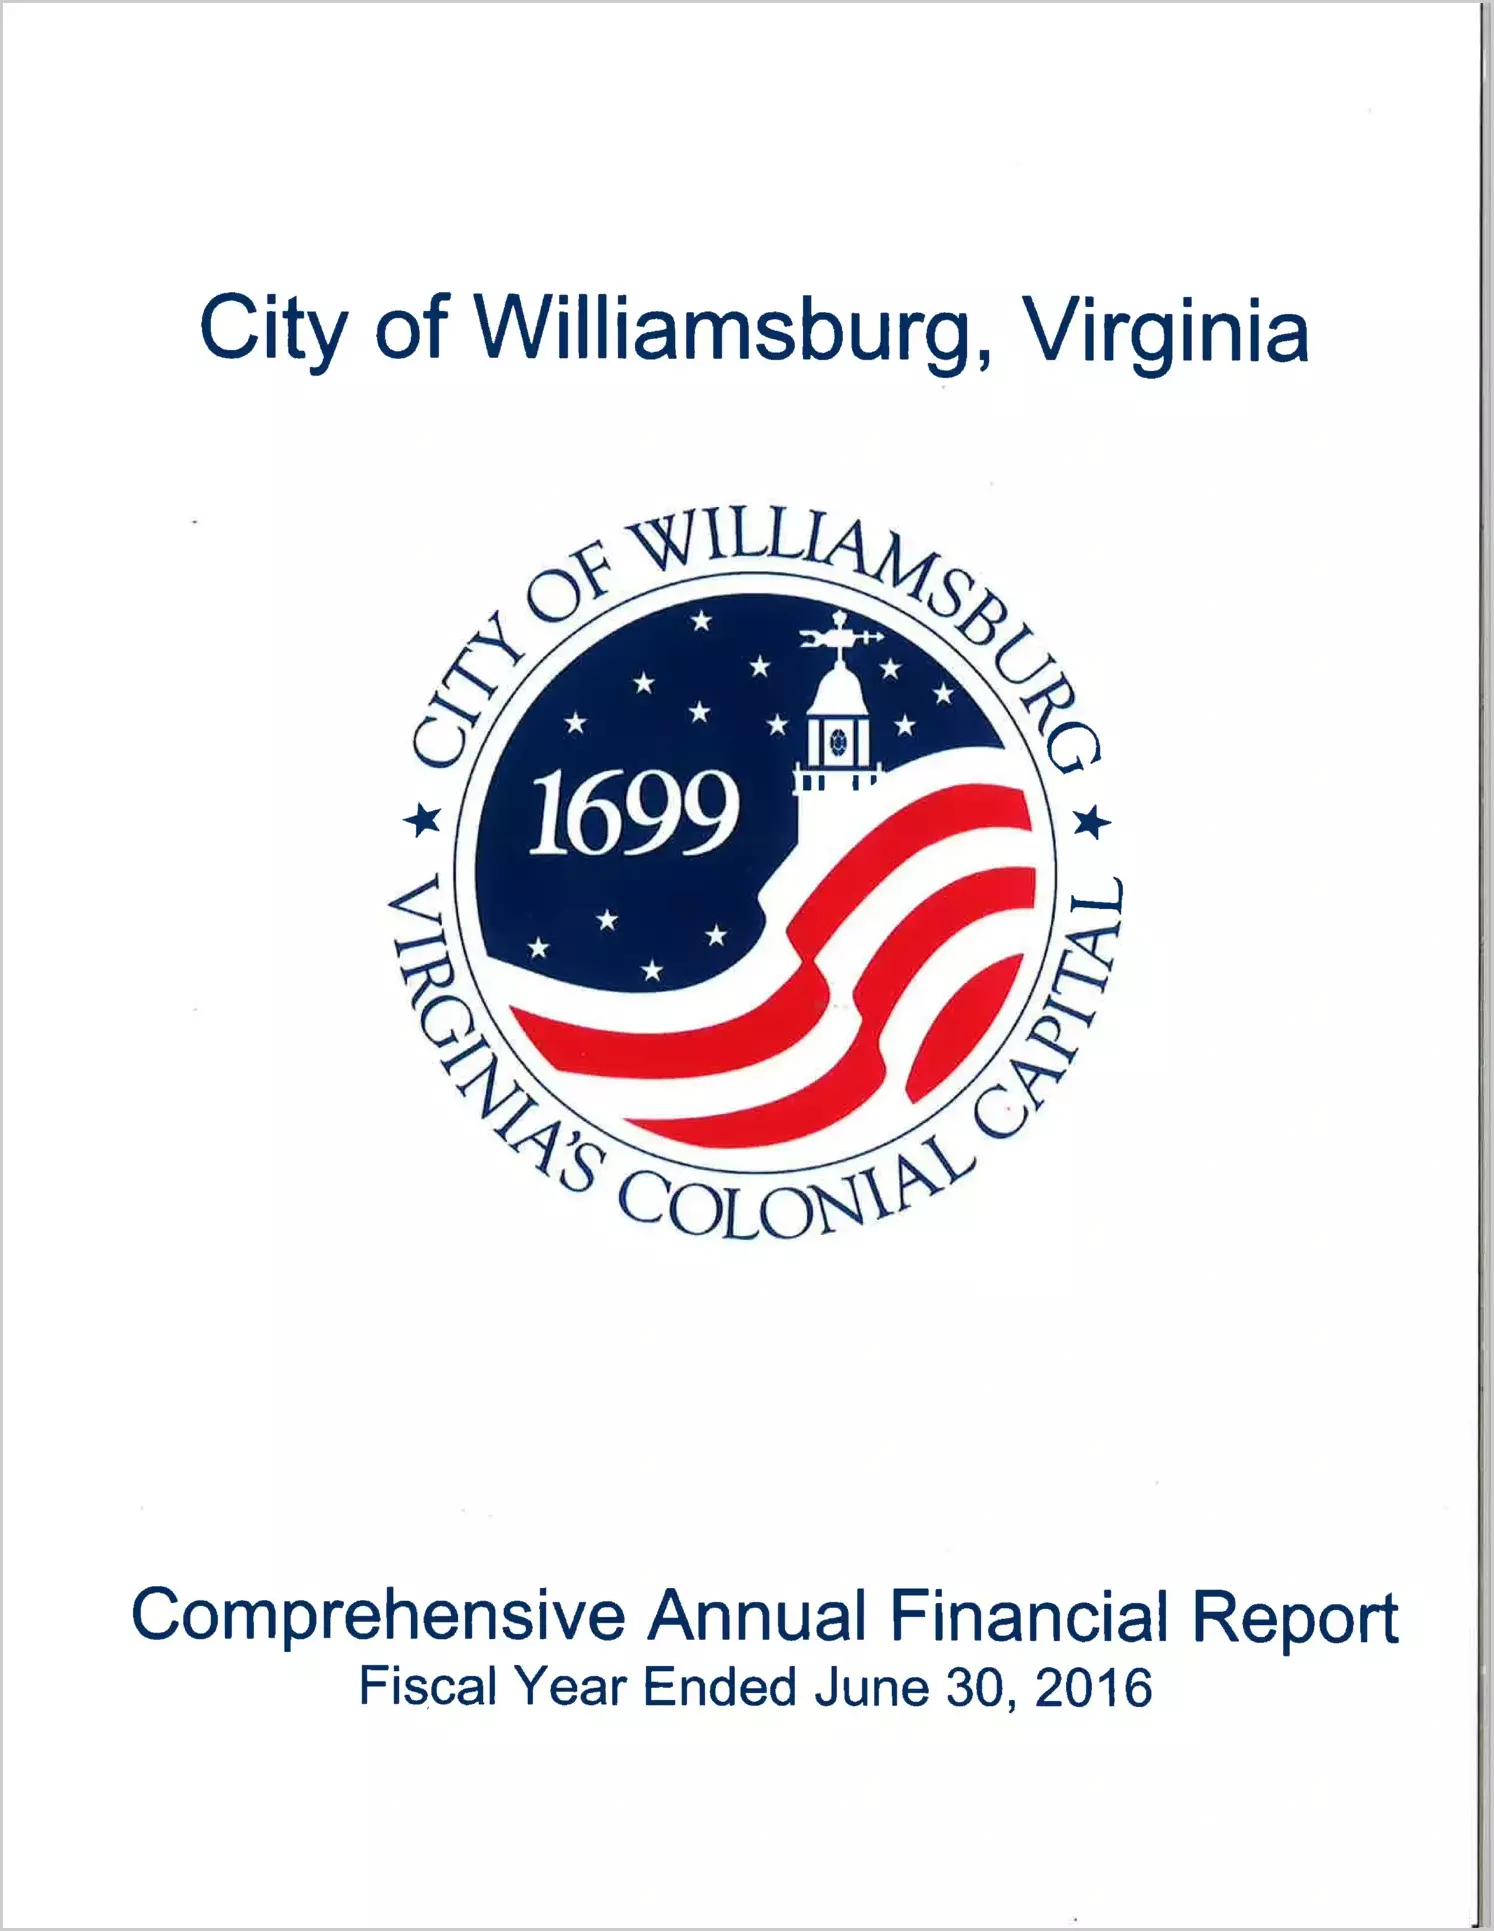 2016 Annual Financial Report for City of Williamsburg